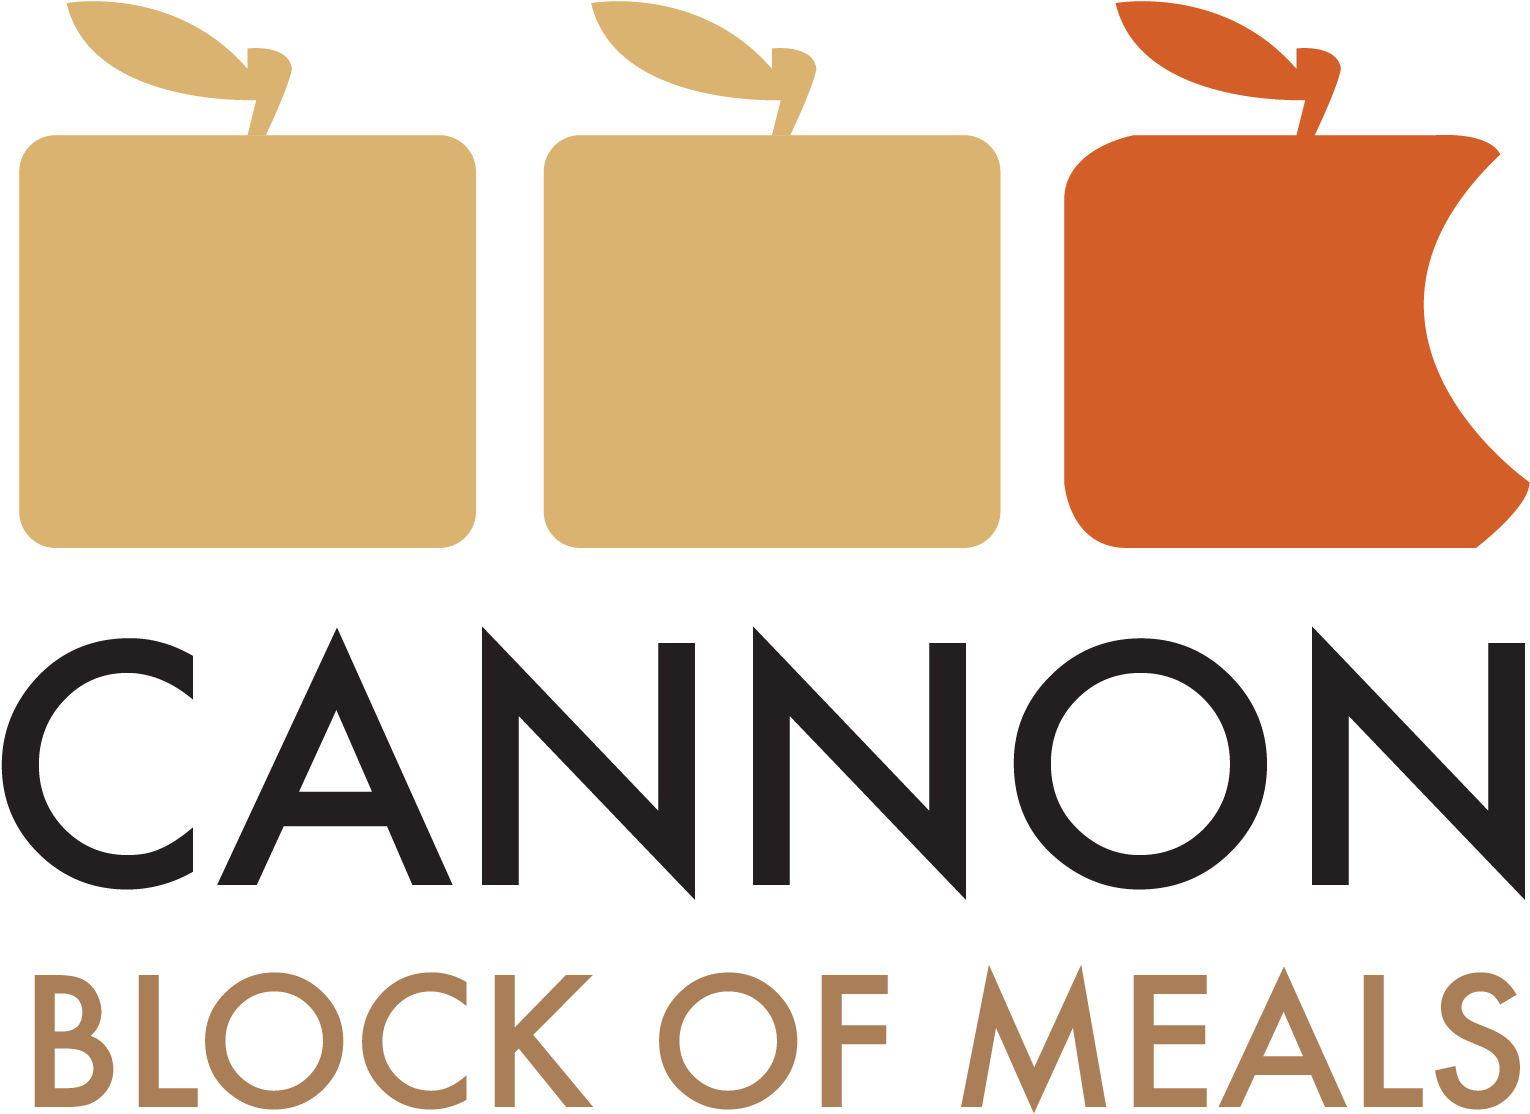 Cannon Block Of Meals Plan Holders Are Allotted A Block - Mccann New York Logo (1570x1157)